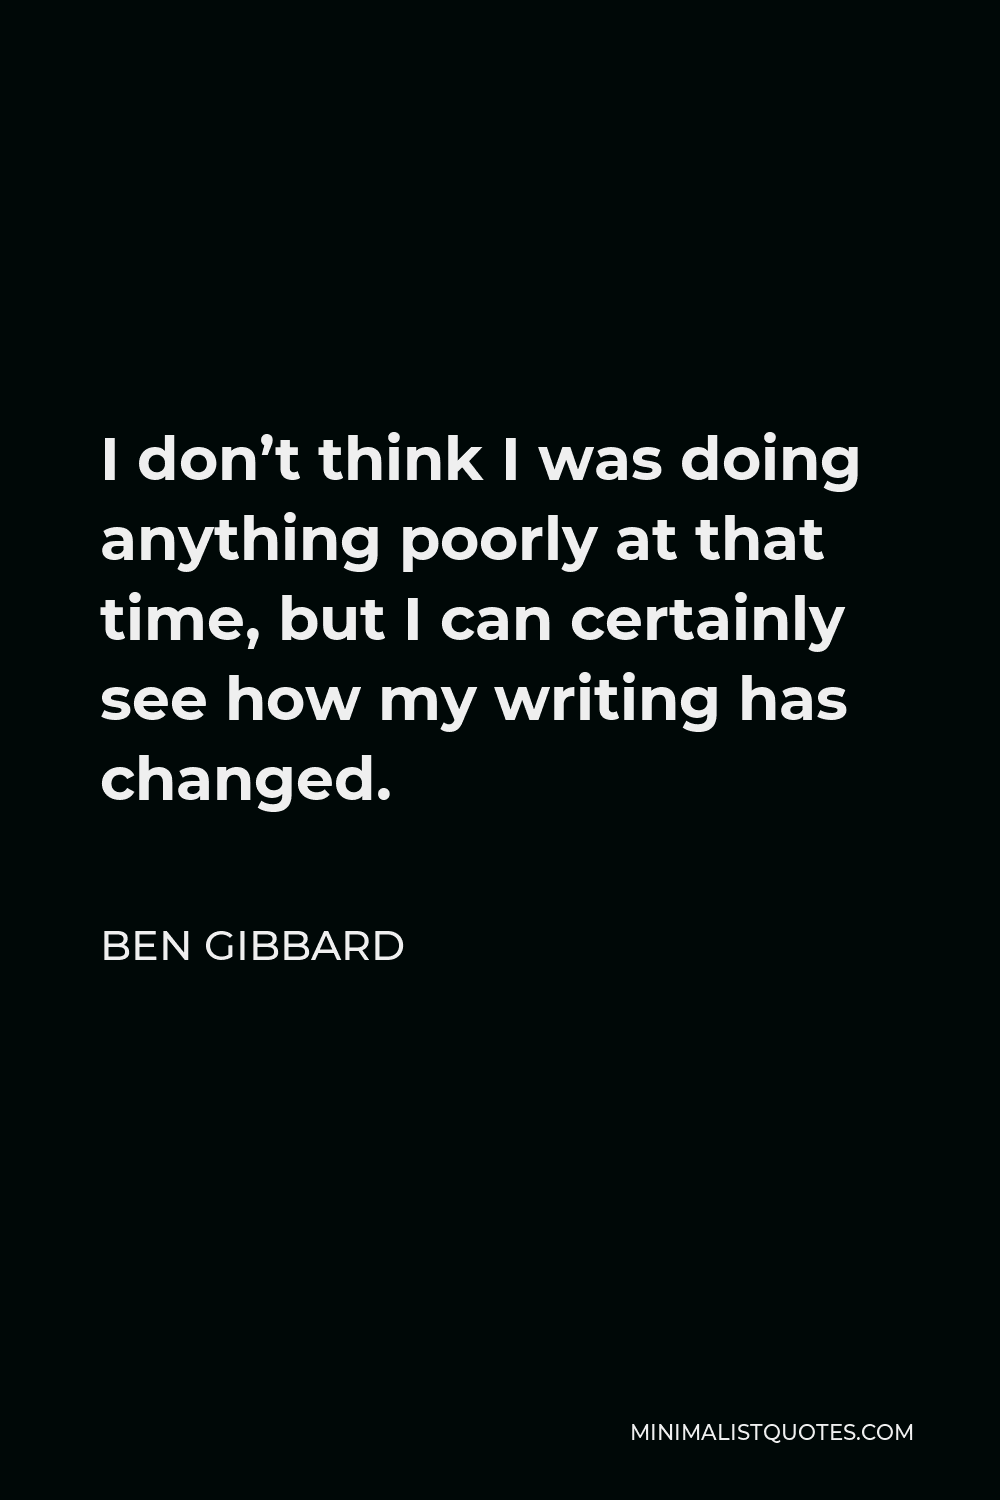 Ben Gibbard Quote - I don’t think I was doing anything poorly at that time, but I can certainly see how my writing has changed.